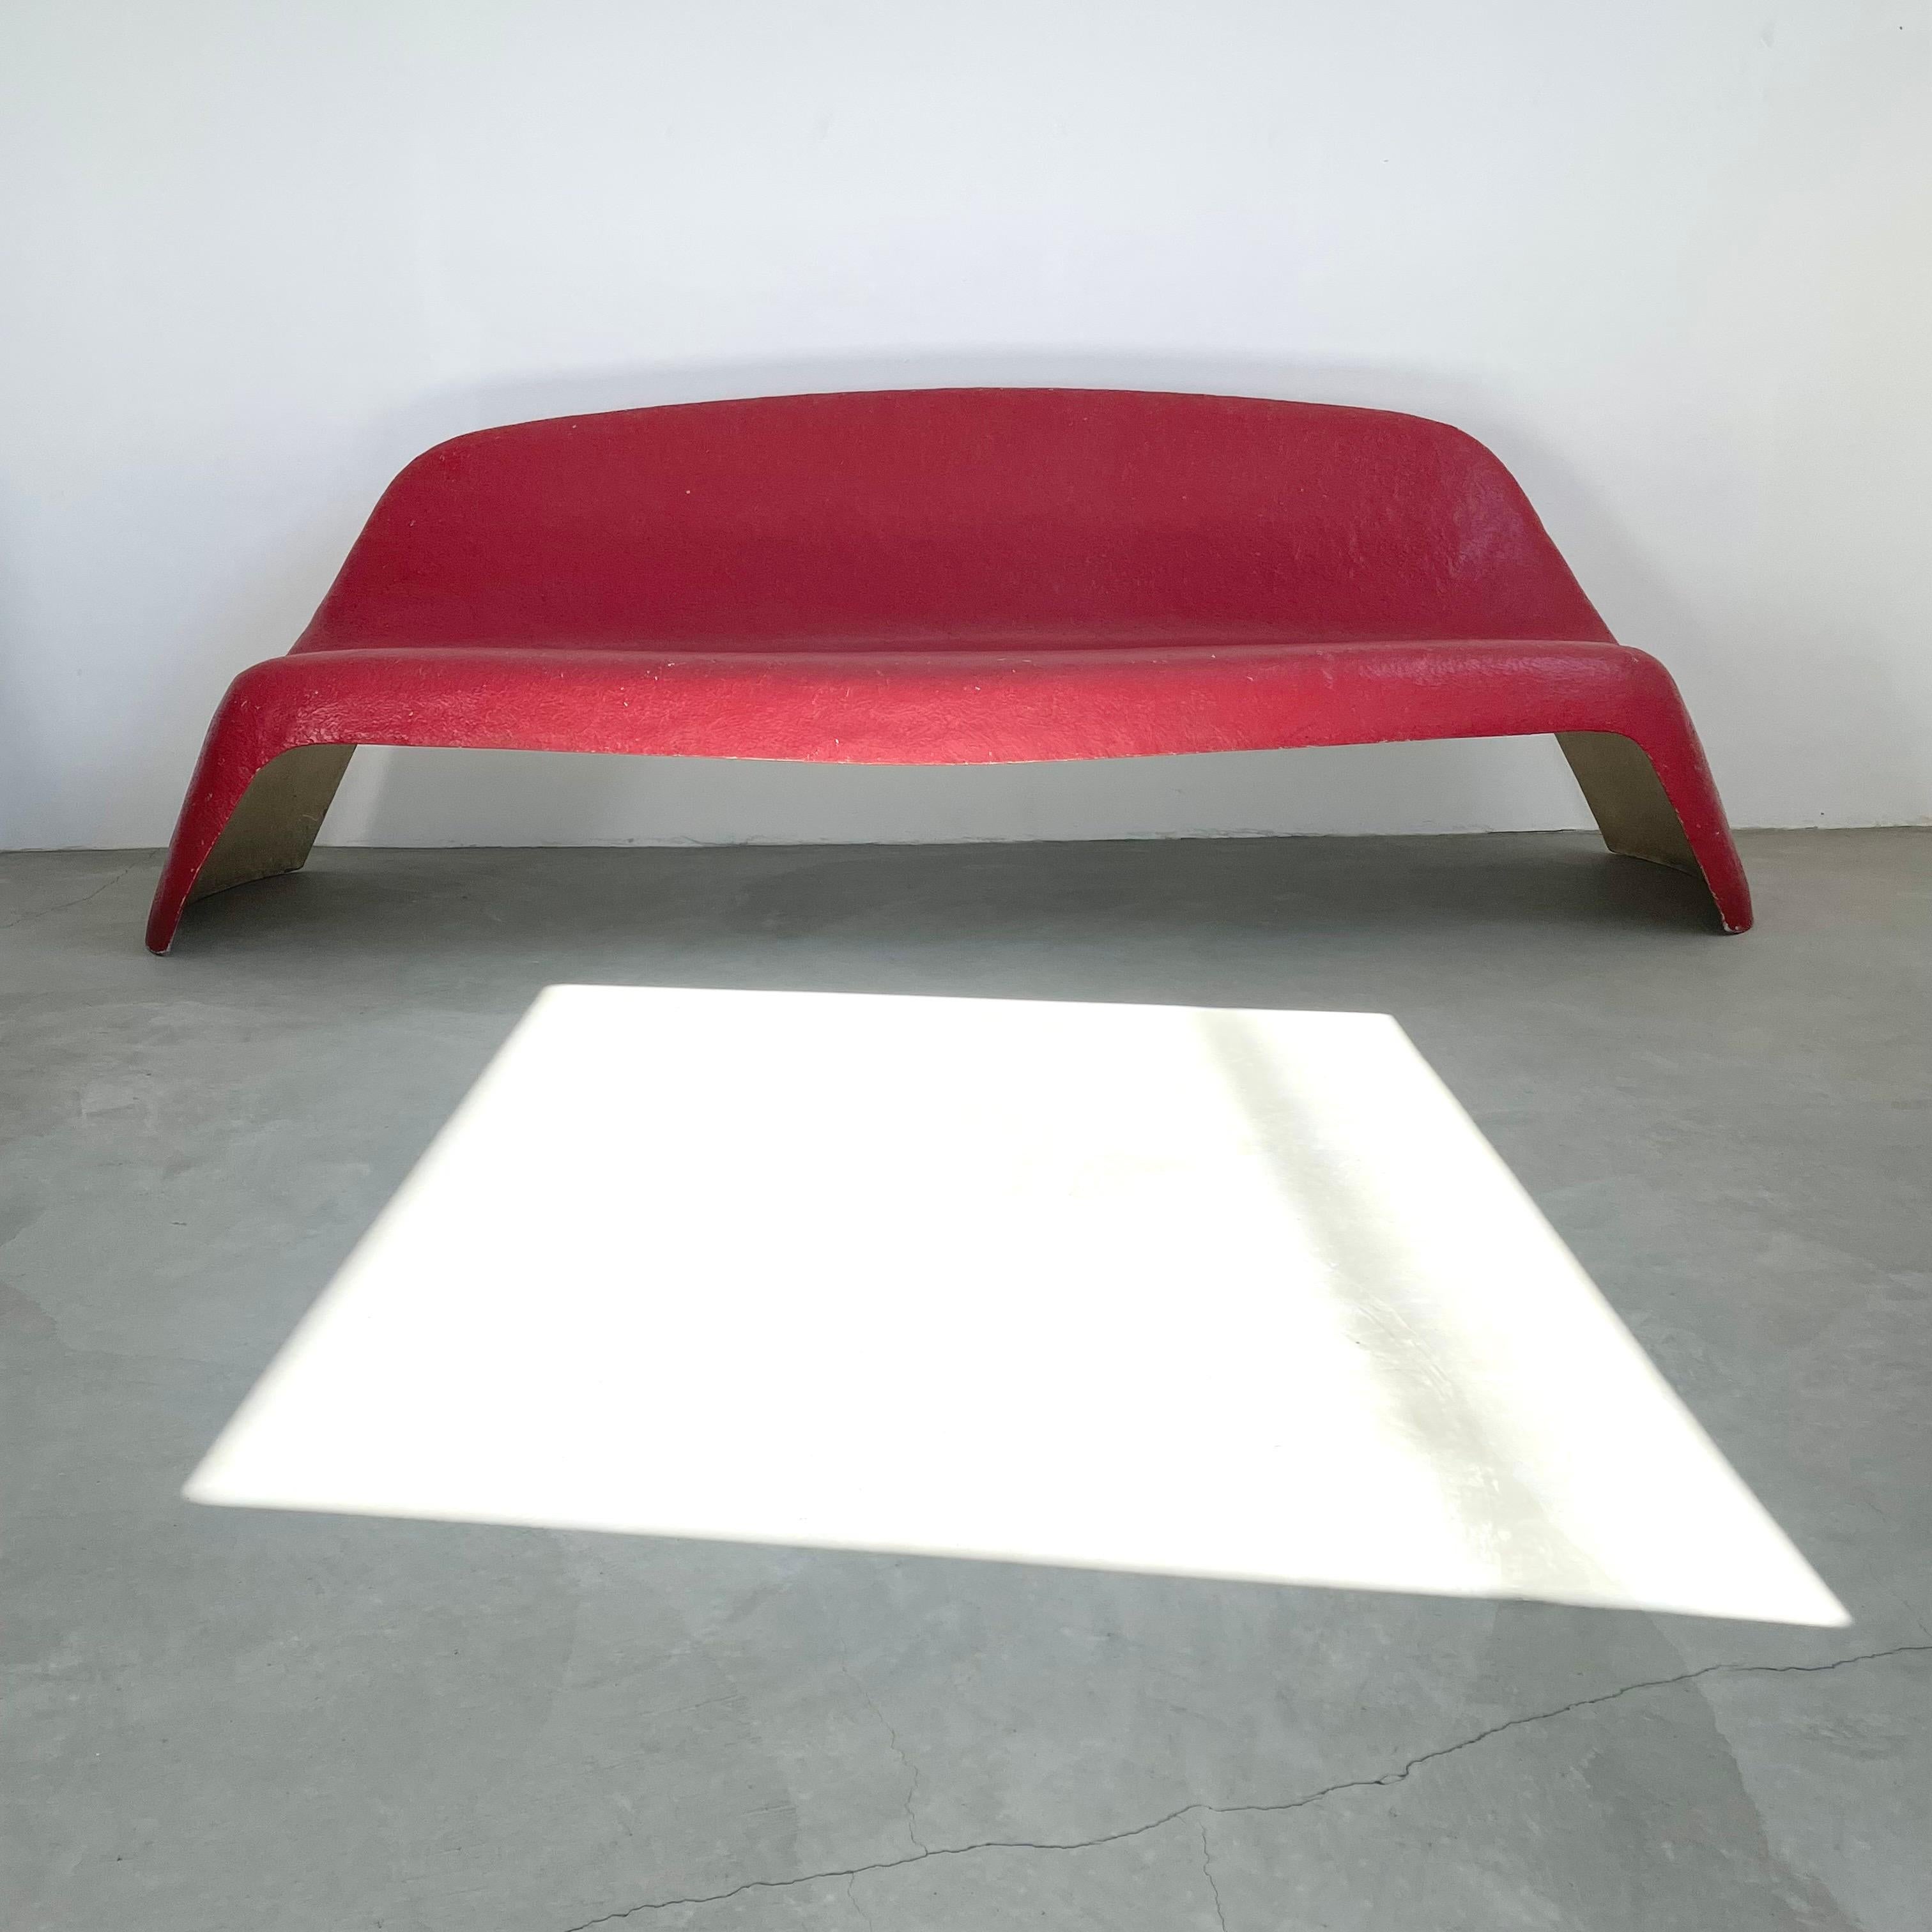 Stunning sculptural fiberglass bench by Walter Papst for Wilkhahn. Made in Germany, in the 1960s. Beautiful and simplistic design. Single piece of fiberglass sculpted with great lines from all angles. Made for the outdoors but also looks great